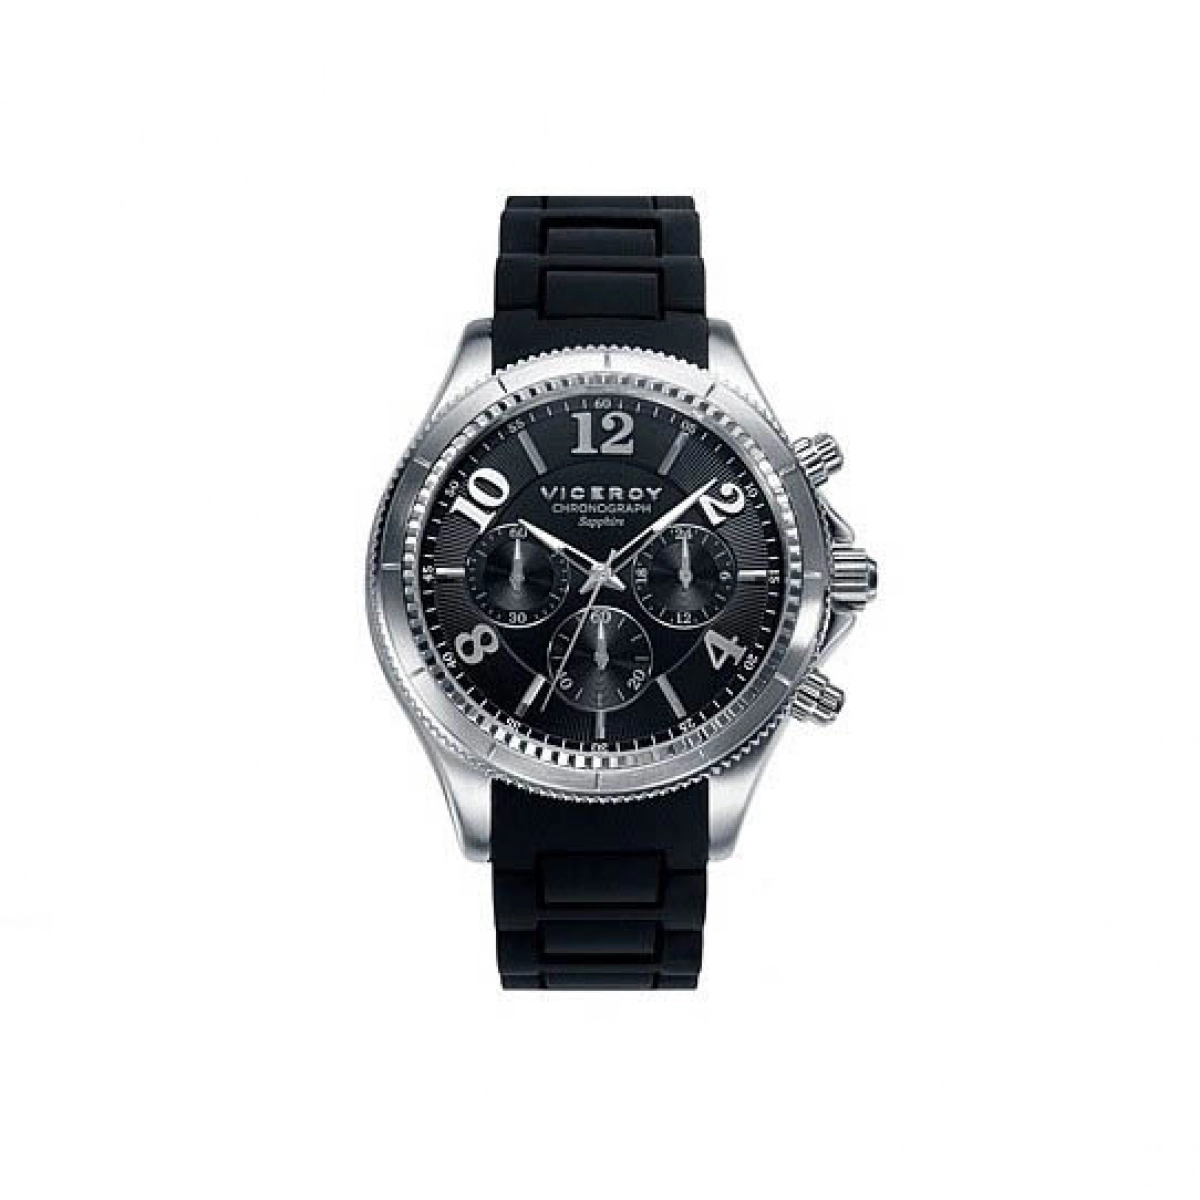 WATCH VICEROY CHRONOGRAPH COLLECTION OF PENELOPE CRU 47893-55